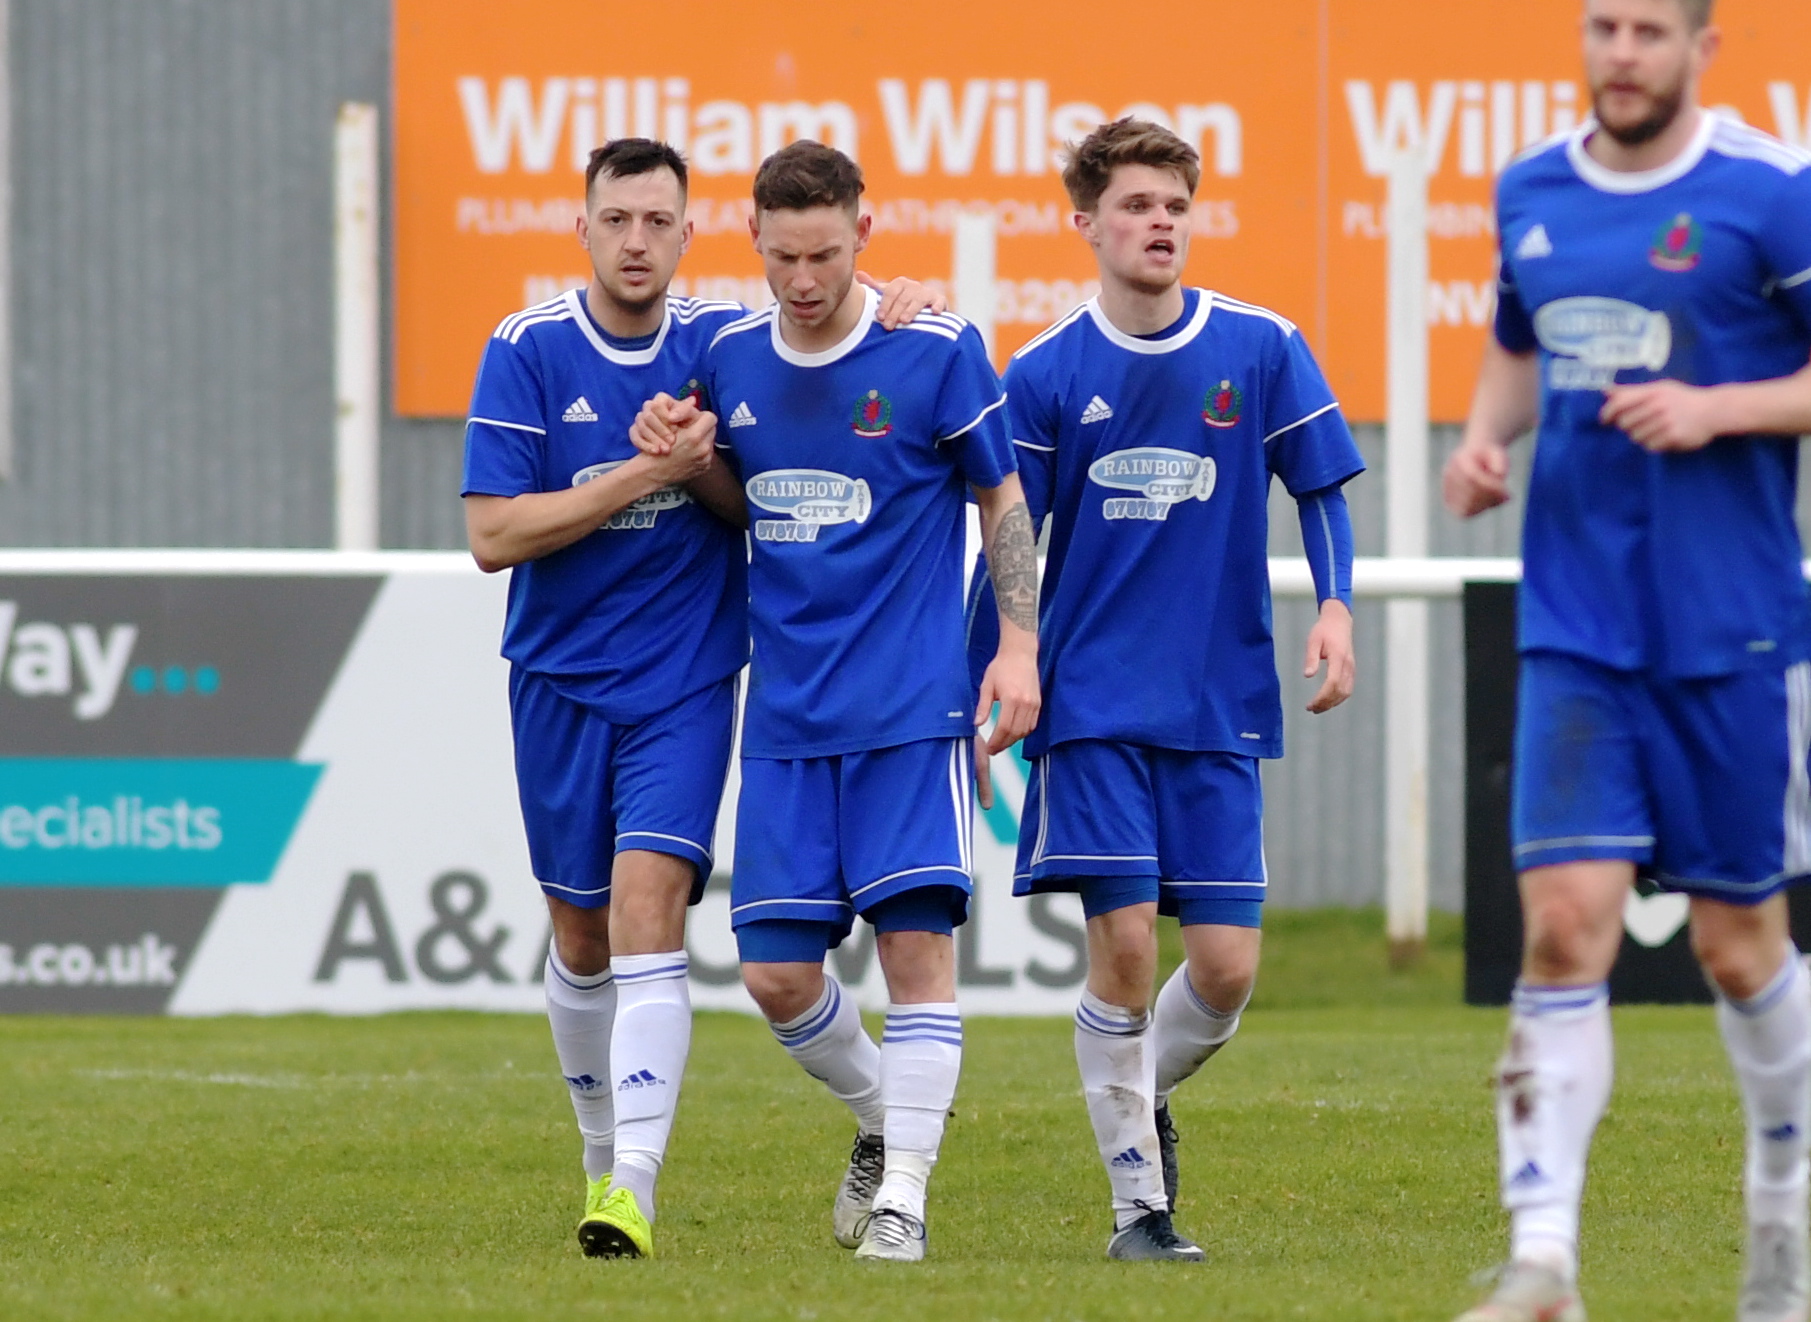 Cove celebrate Sam Burnett's goal.
Picture by KATH FLANNERY